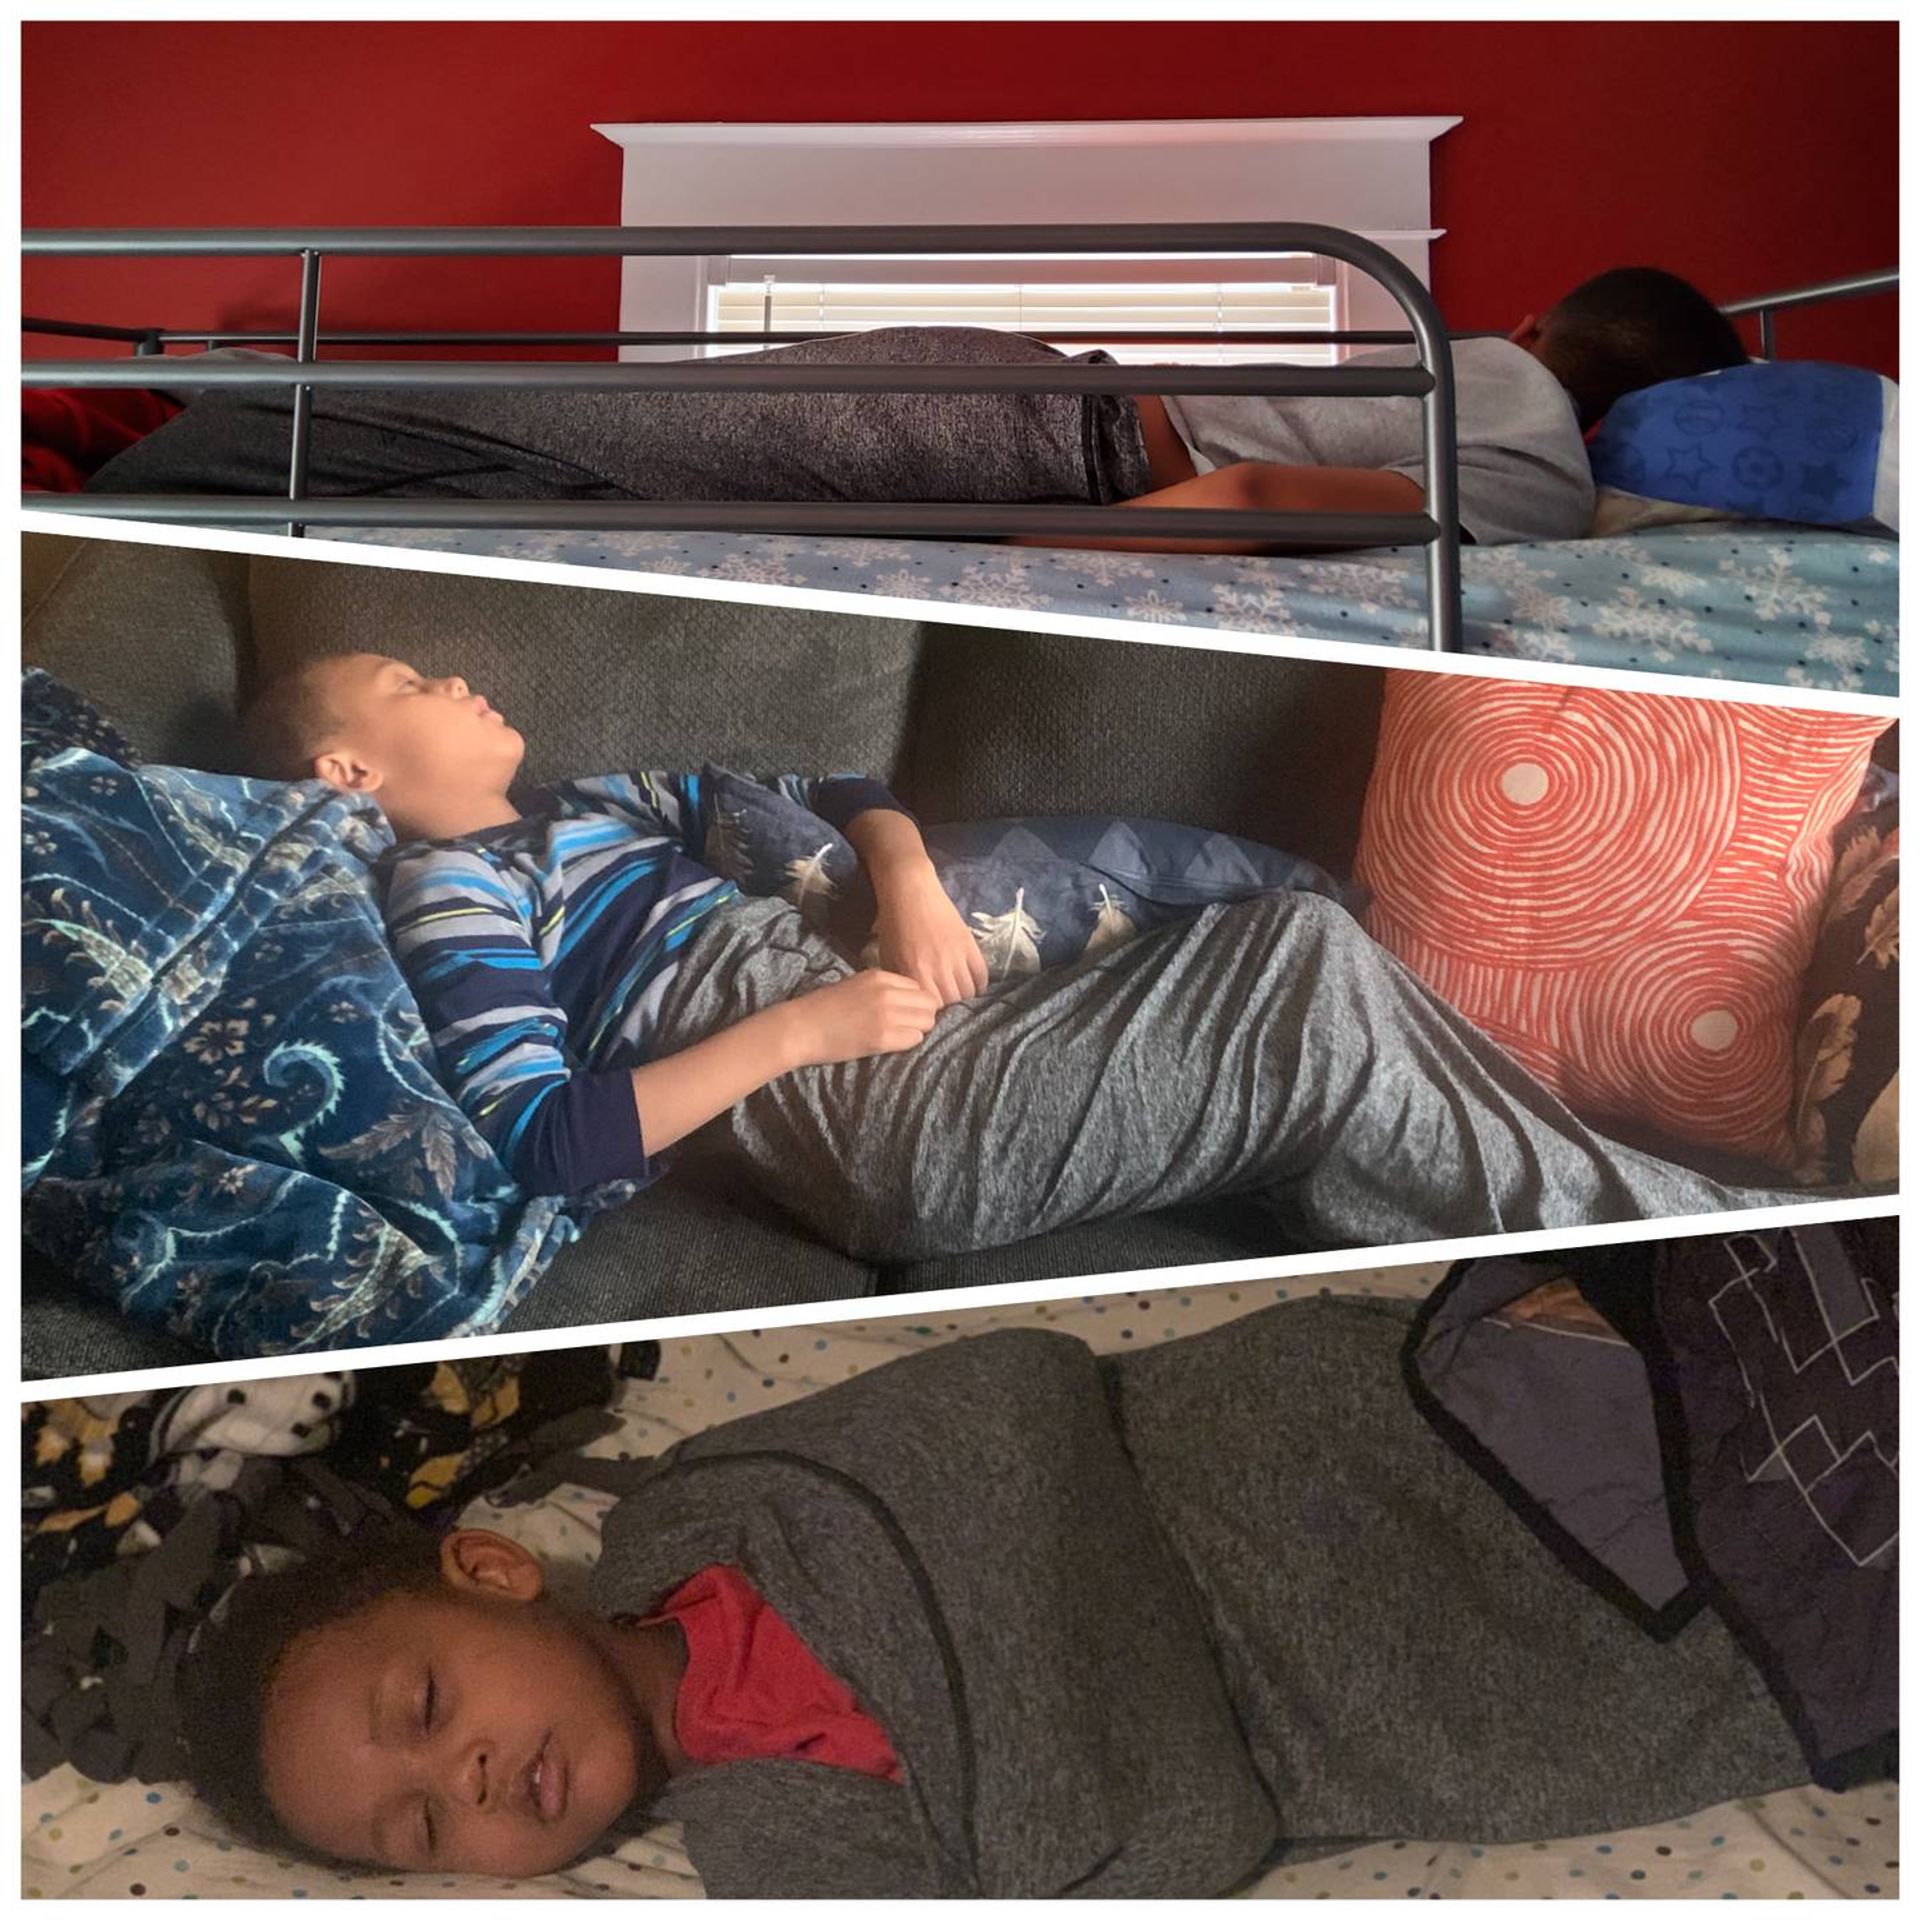 The compression sleep pods Mount Olivet distributed to help families cope with the trauma of the last year.